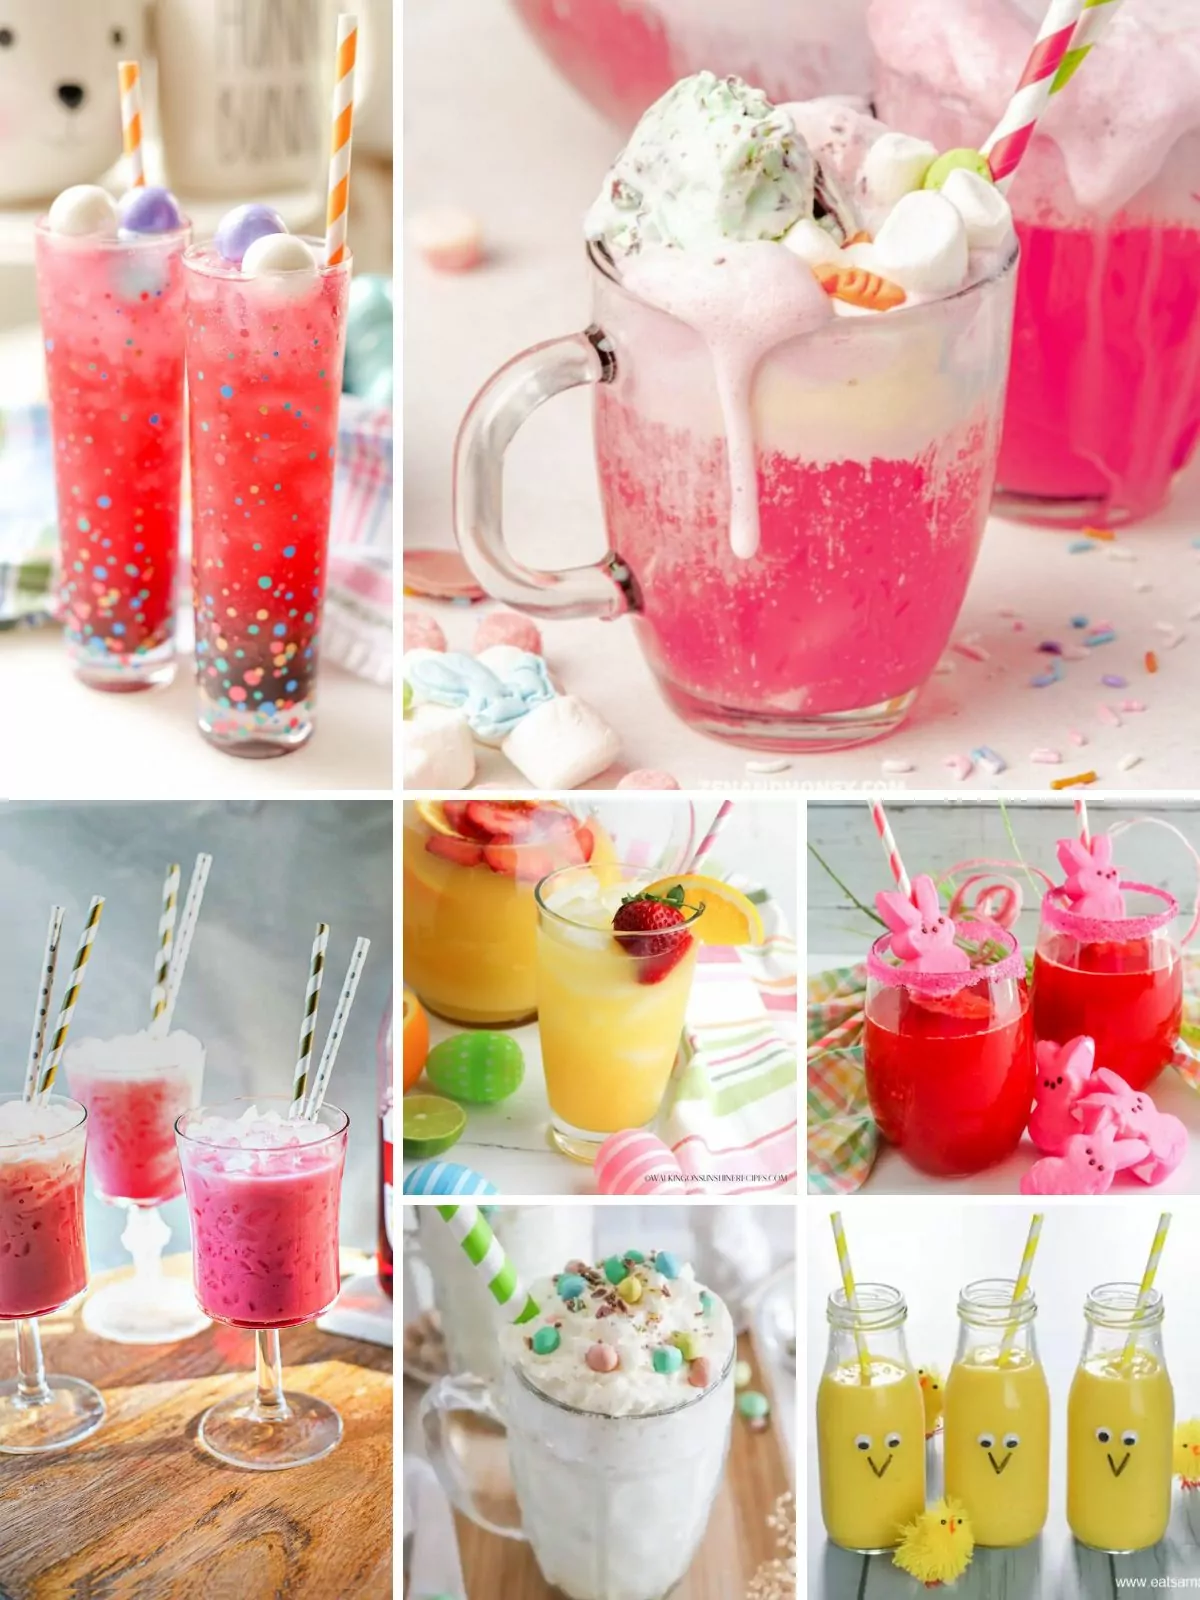 20 assorted drink recipes for kids.